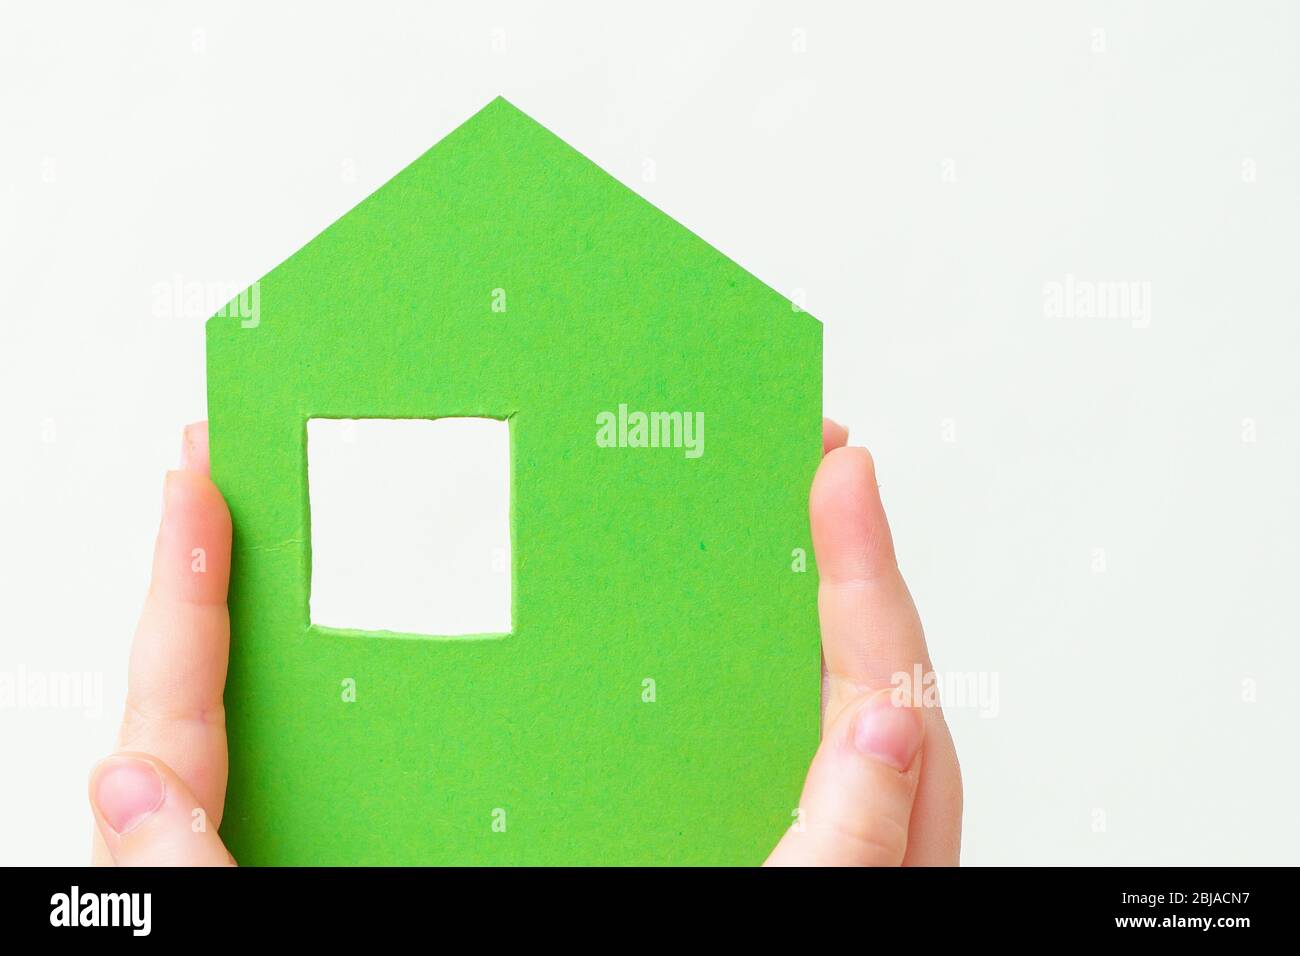 Children's hands holding a green paper house on a white background. Stock Photo